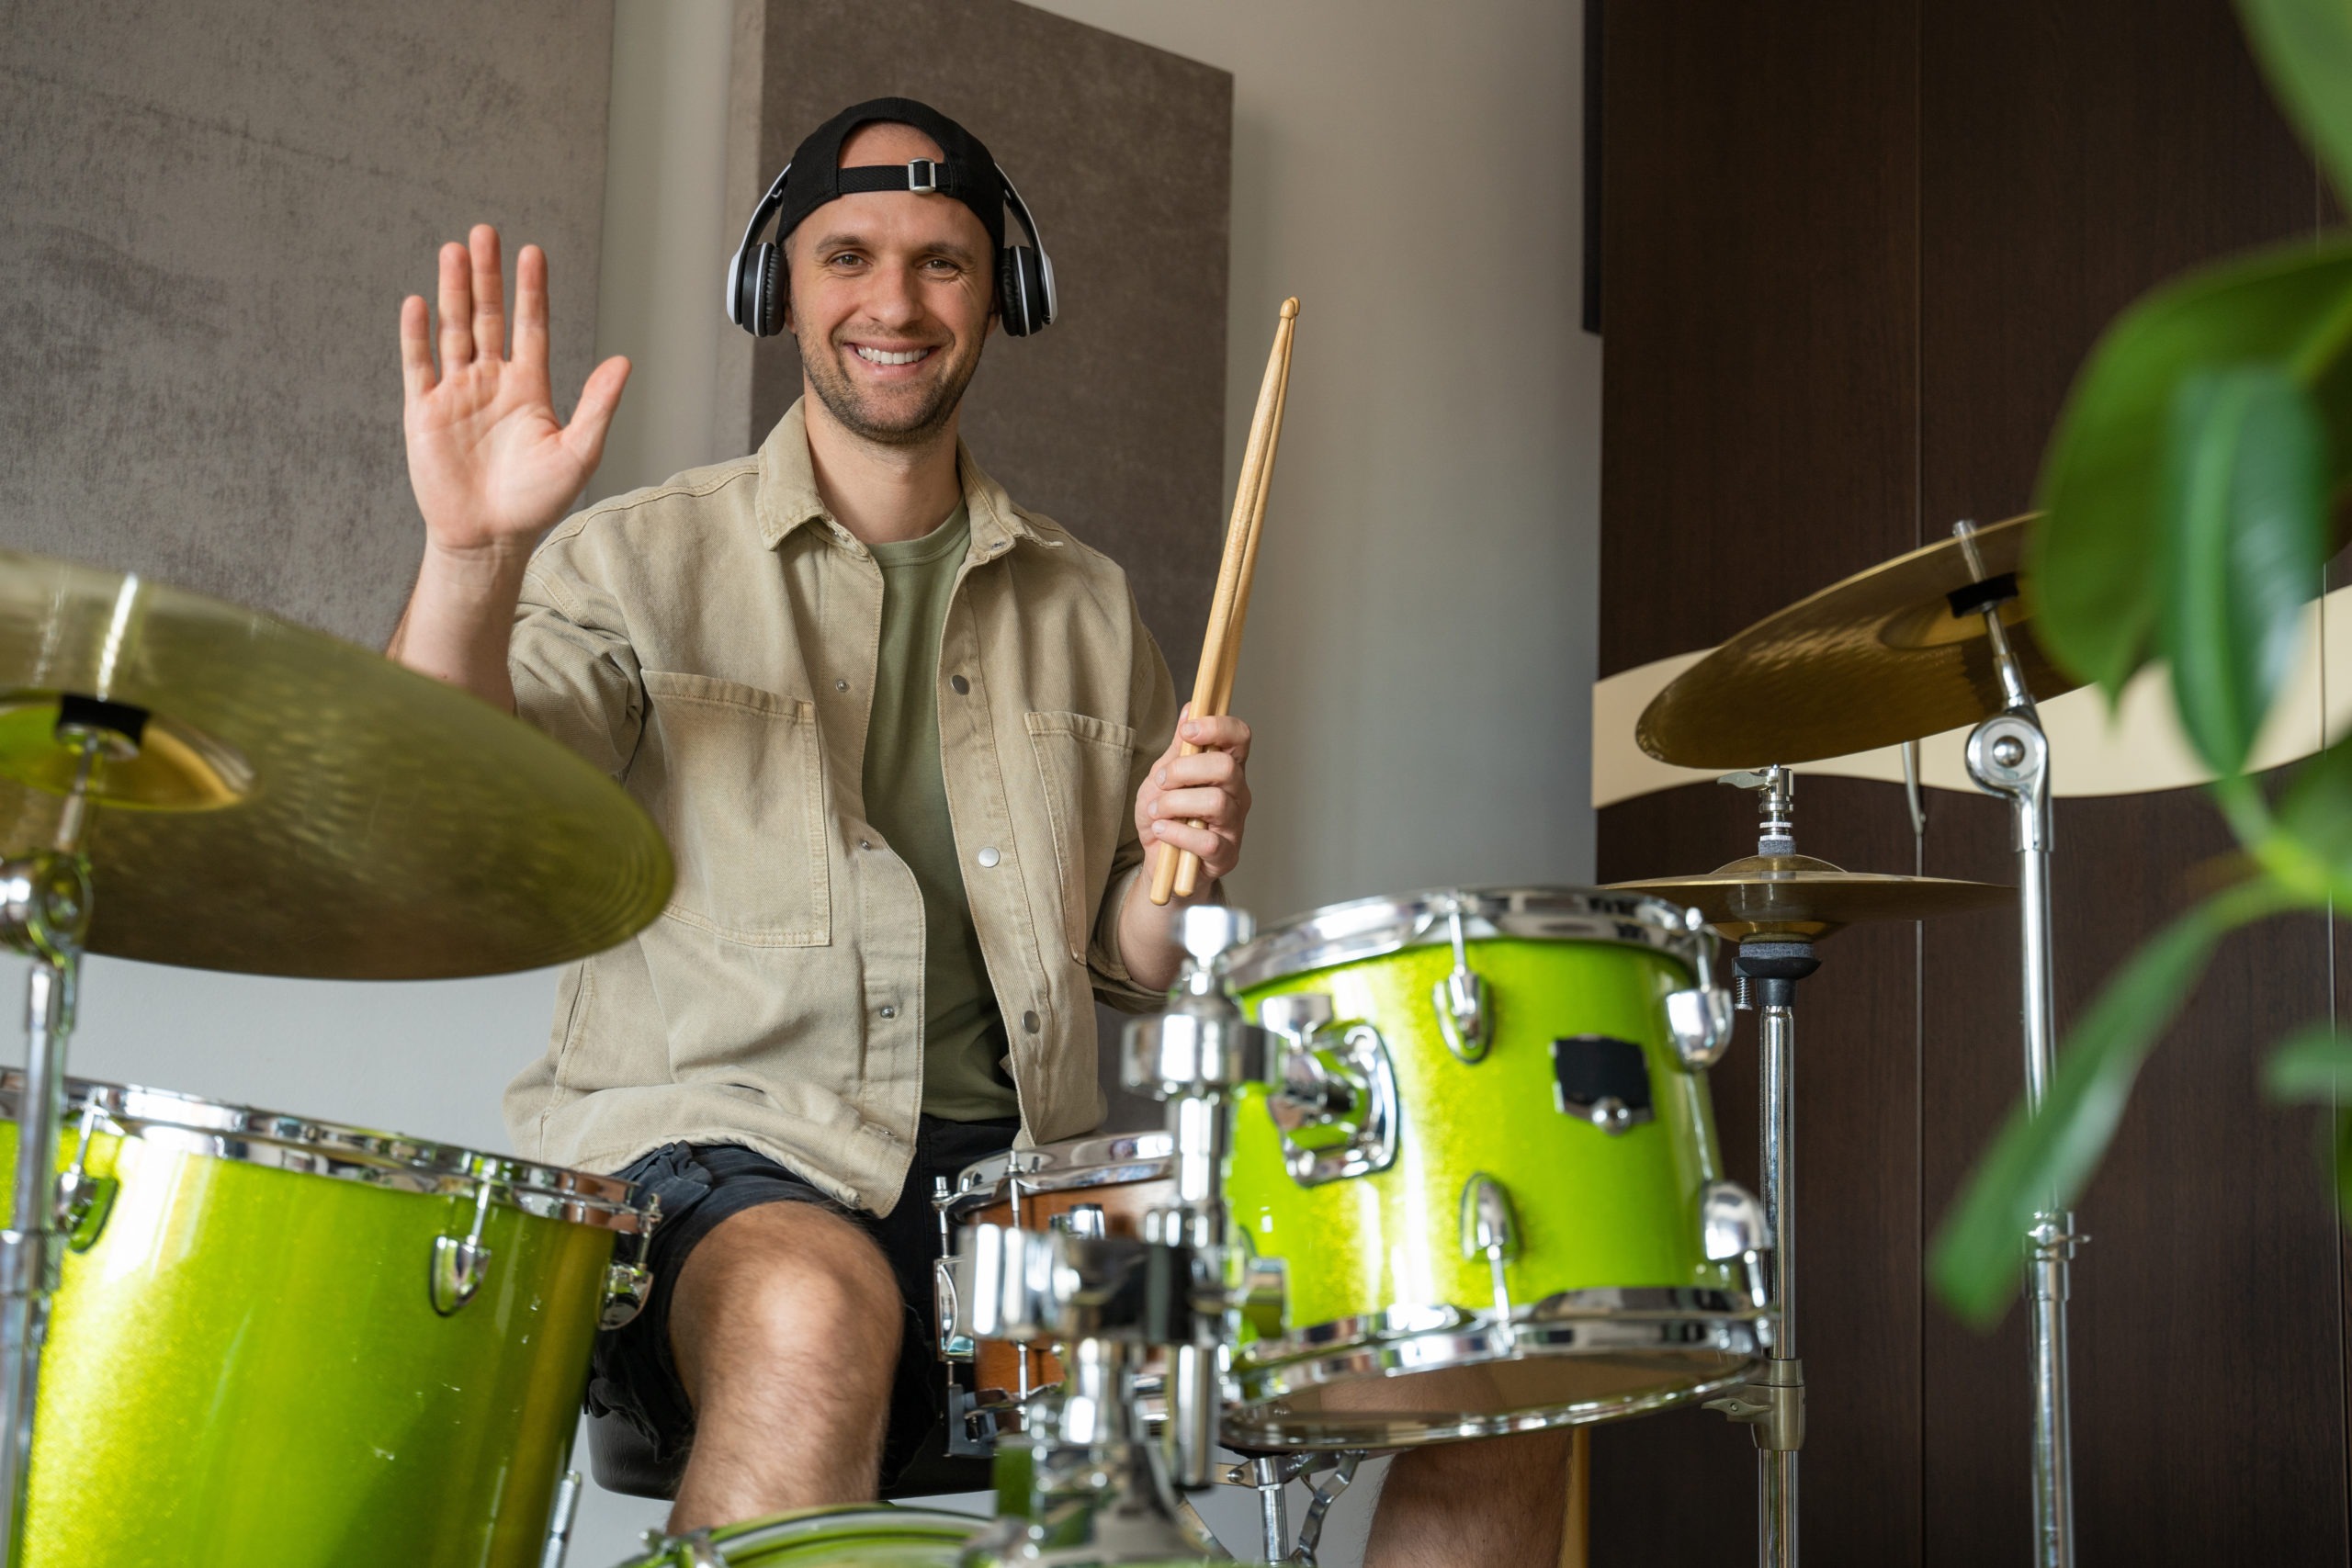 Man records drum lesson demonstrating playing drums